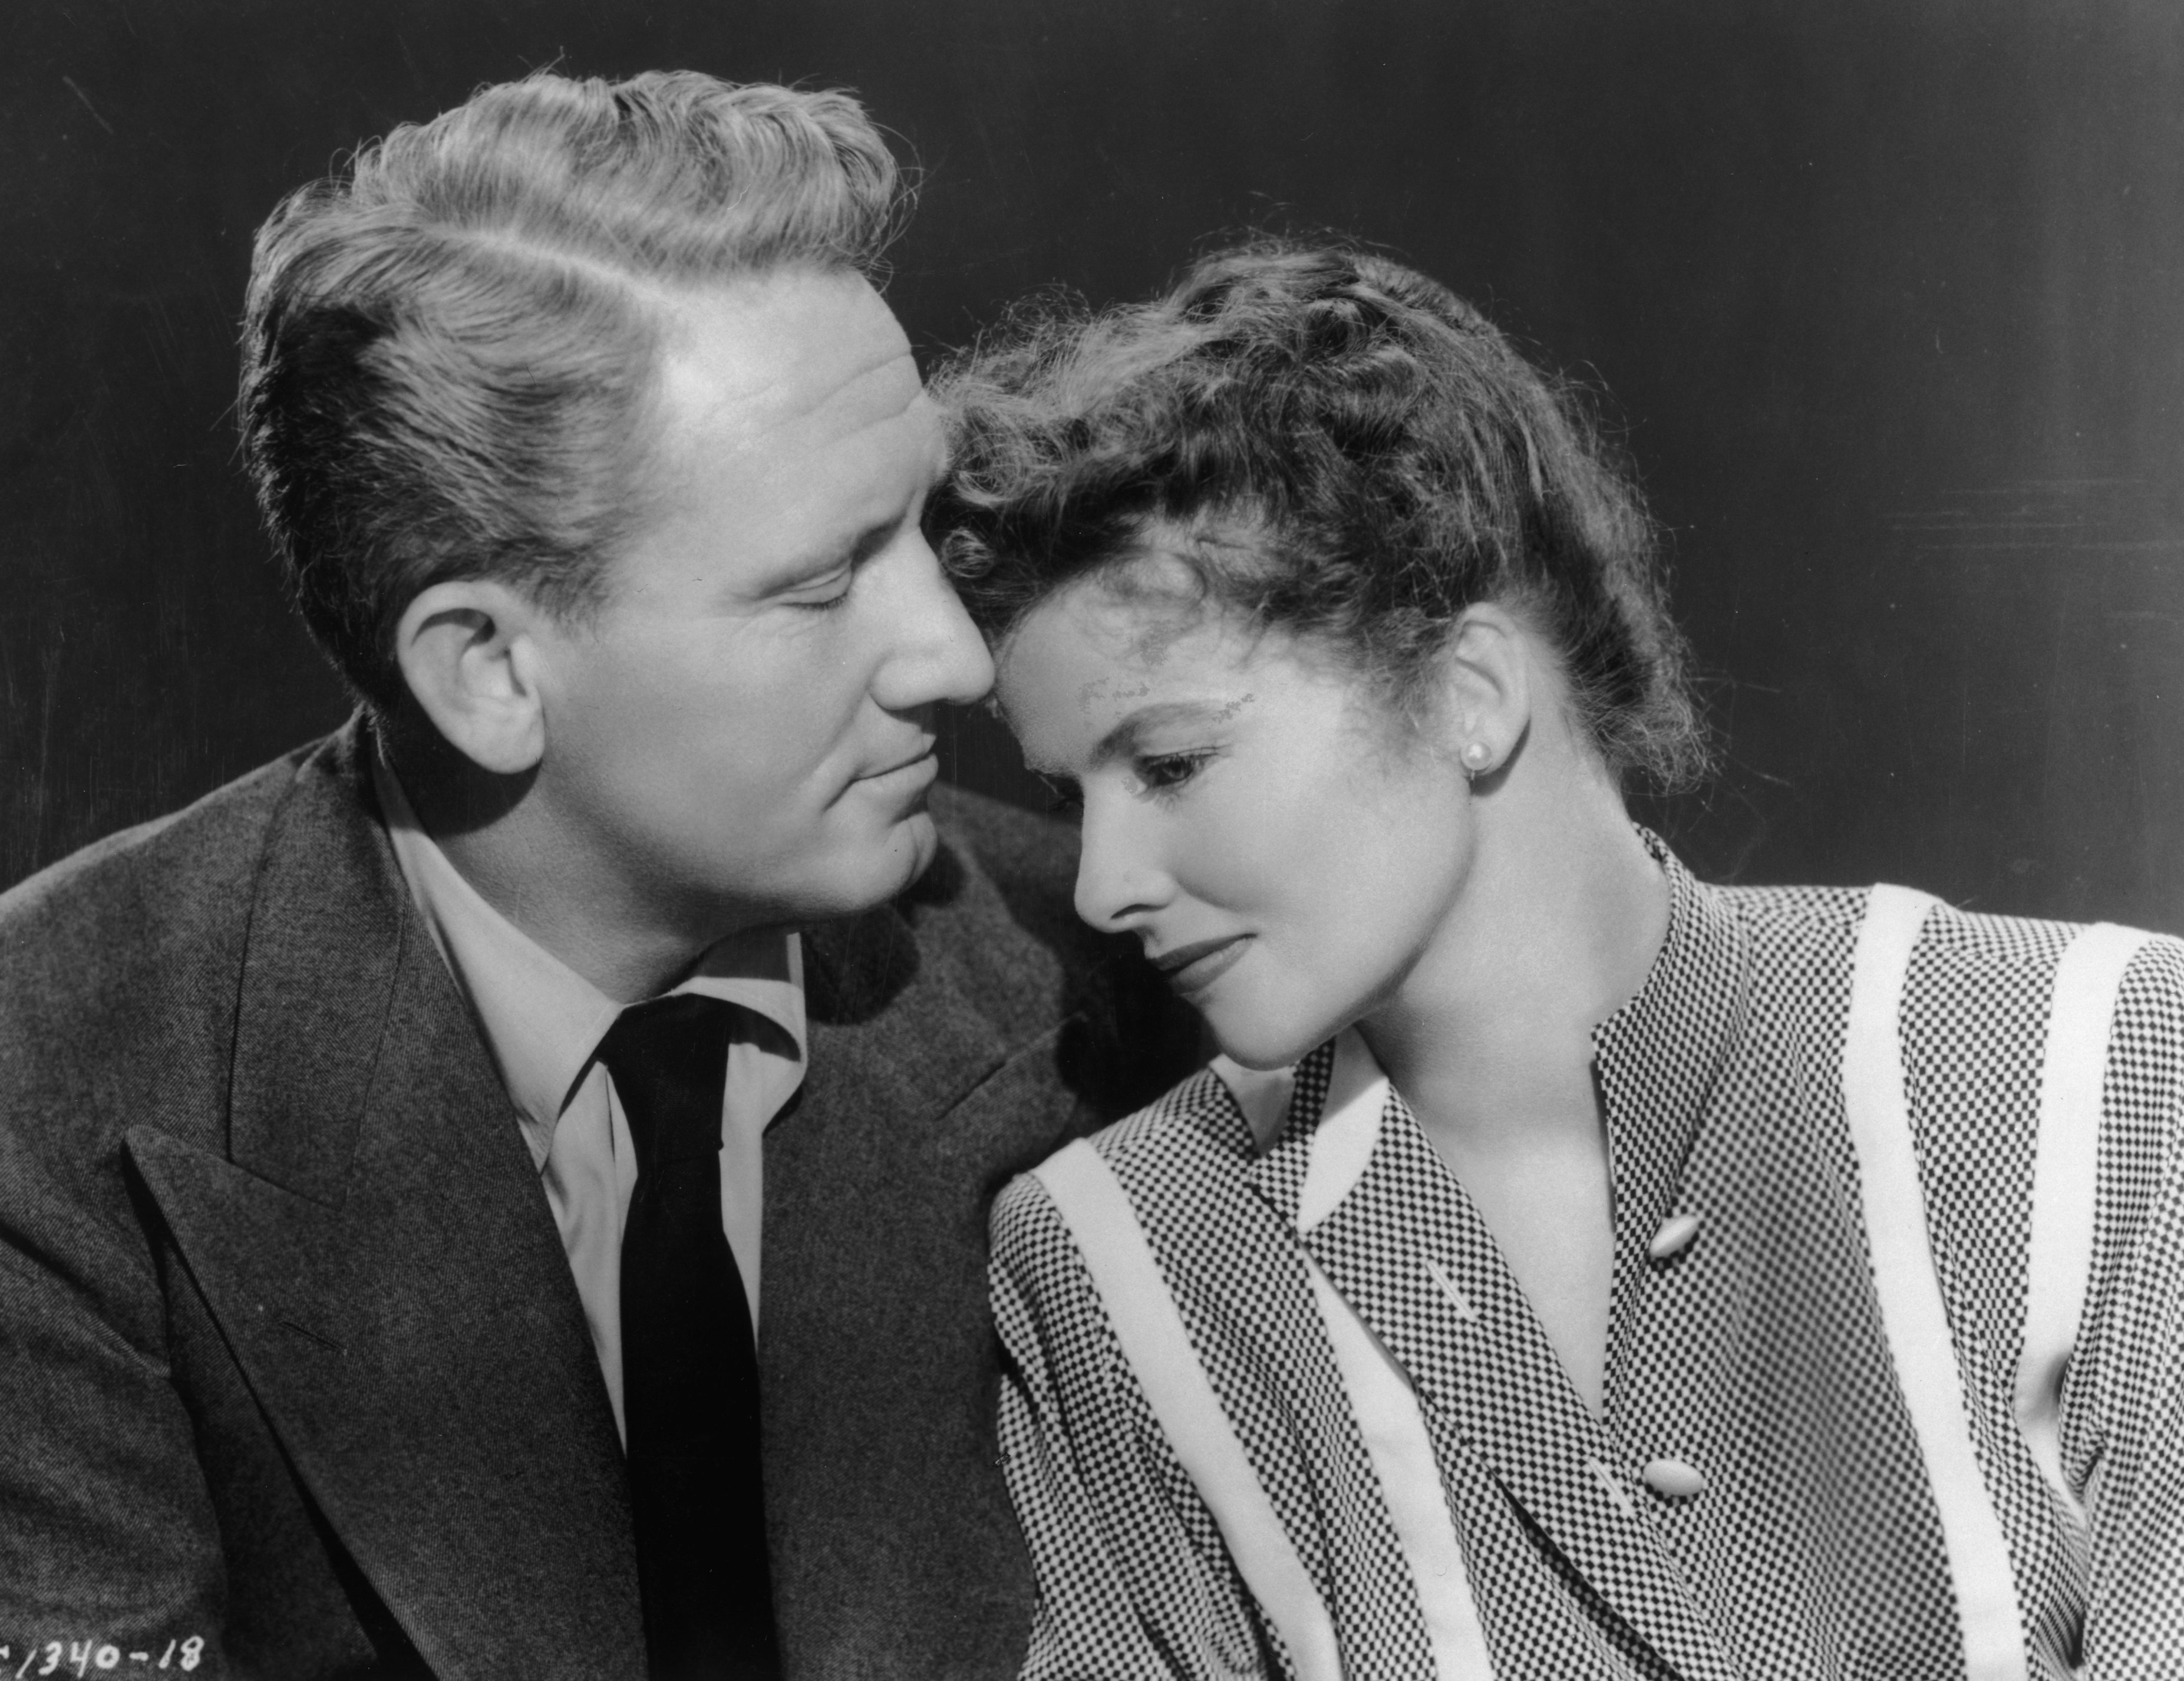 American actors Spencer Tracy (1900 - 1967) and Katharine Hepburn (1907 - 2003) comfort one another in a still from director Harold S Bucquet's film, 'Without Love'. | Source: Getty Images